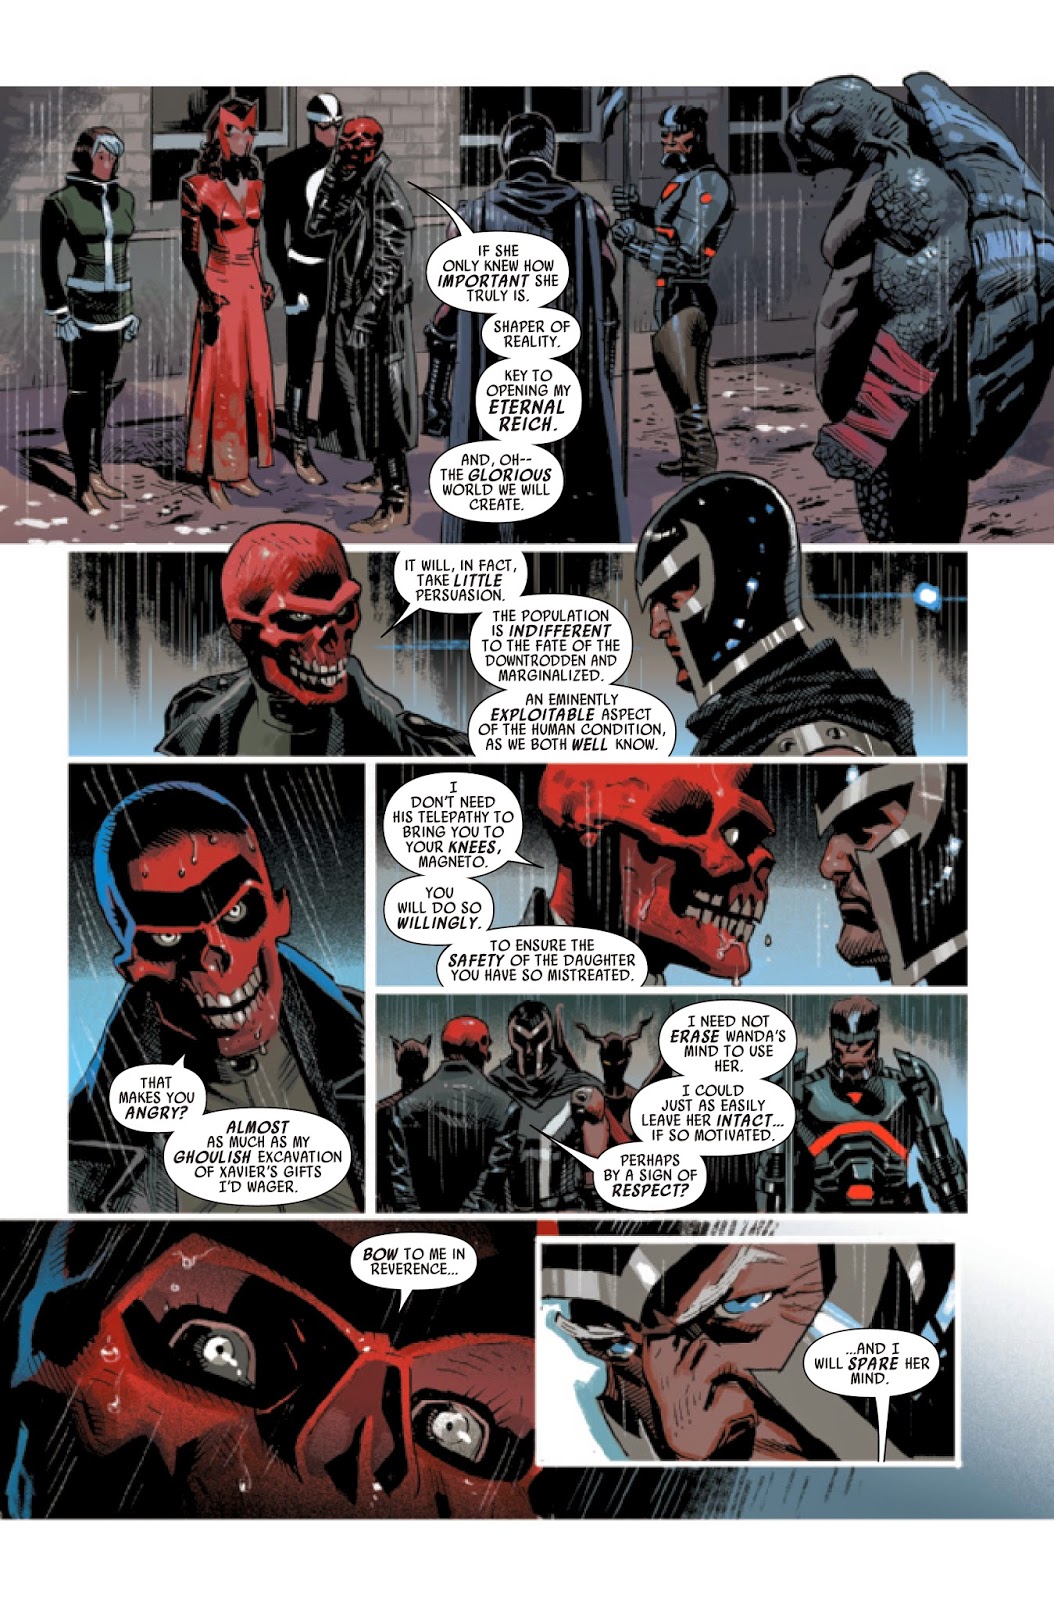 Review of Marvels Uncanny Avengers #25 by Rick Remender and Daniel Acuna